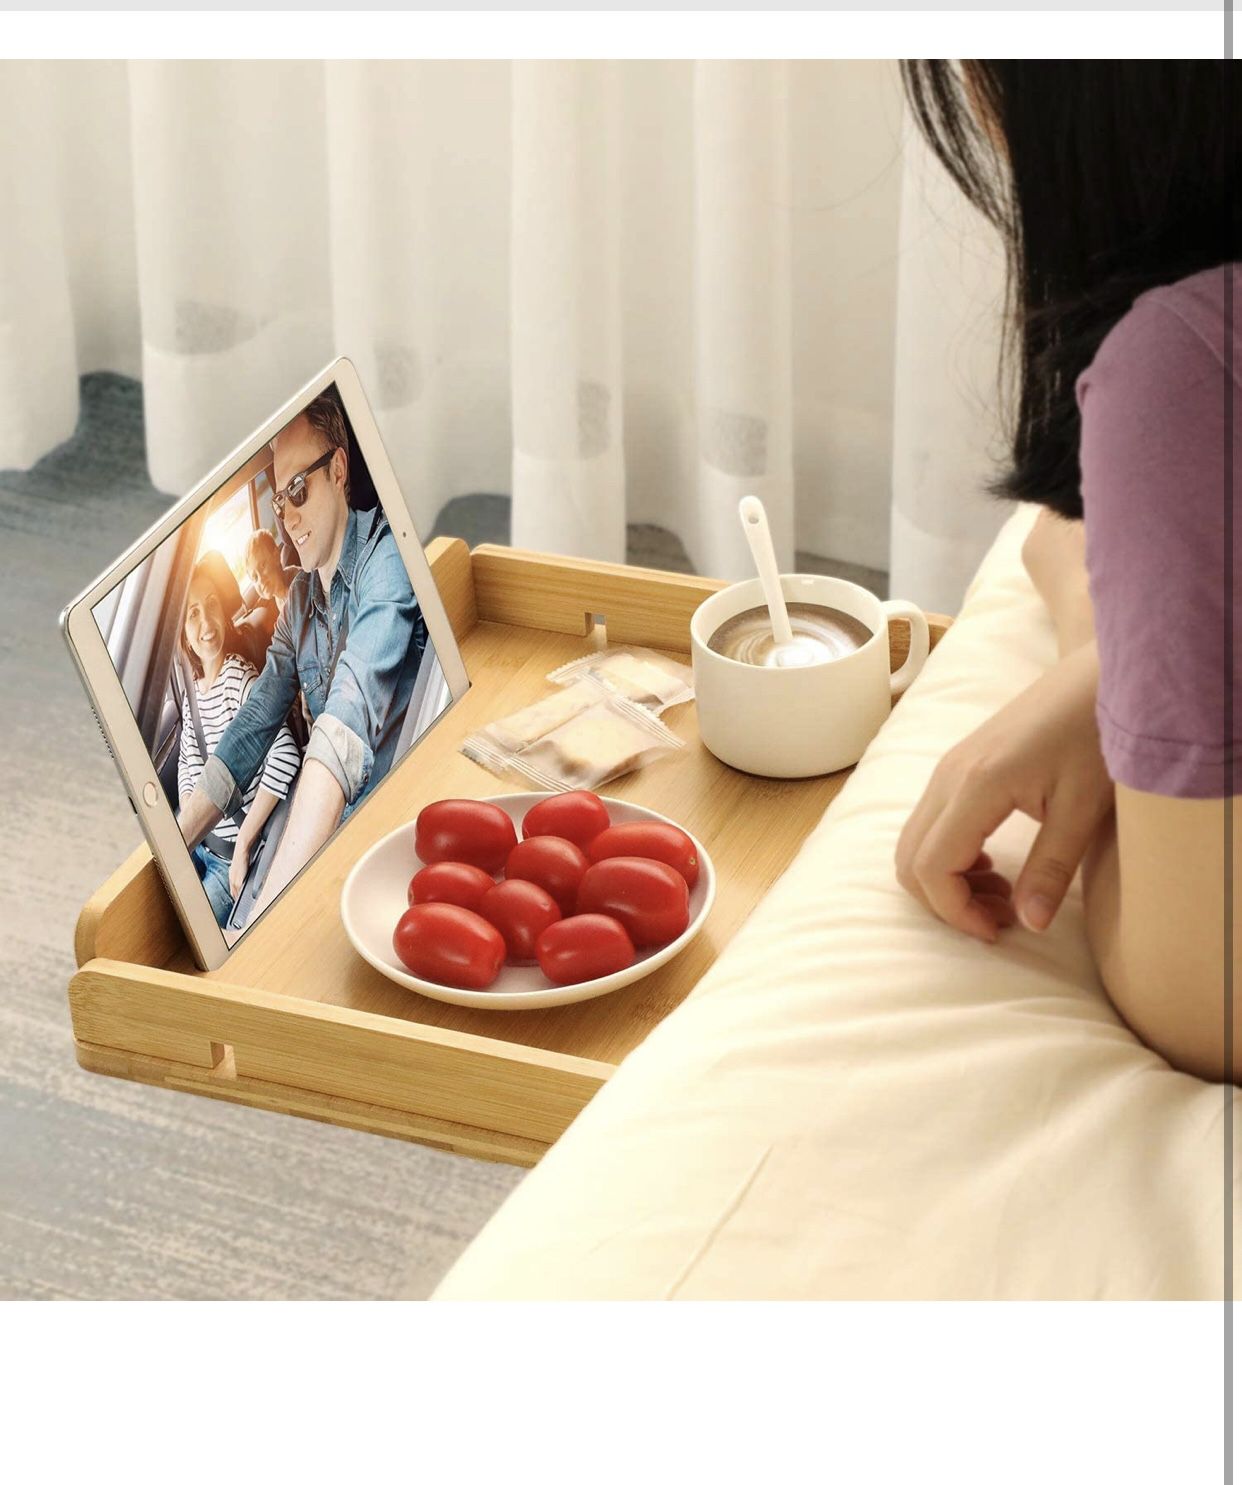  Bamboo Bedside Shelf for Bed with Cable Management & Cup Holder, Versatile Use as Snack Bedside Table, Tablet Holder